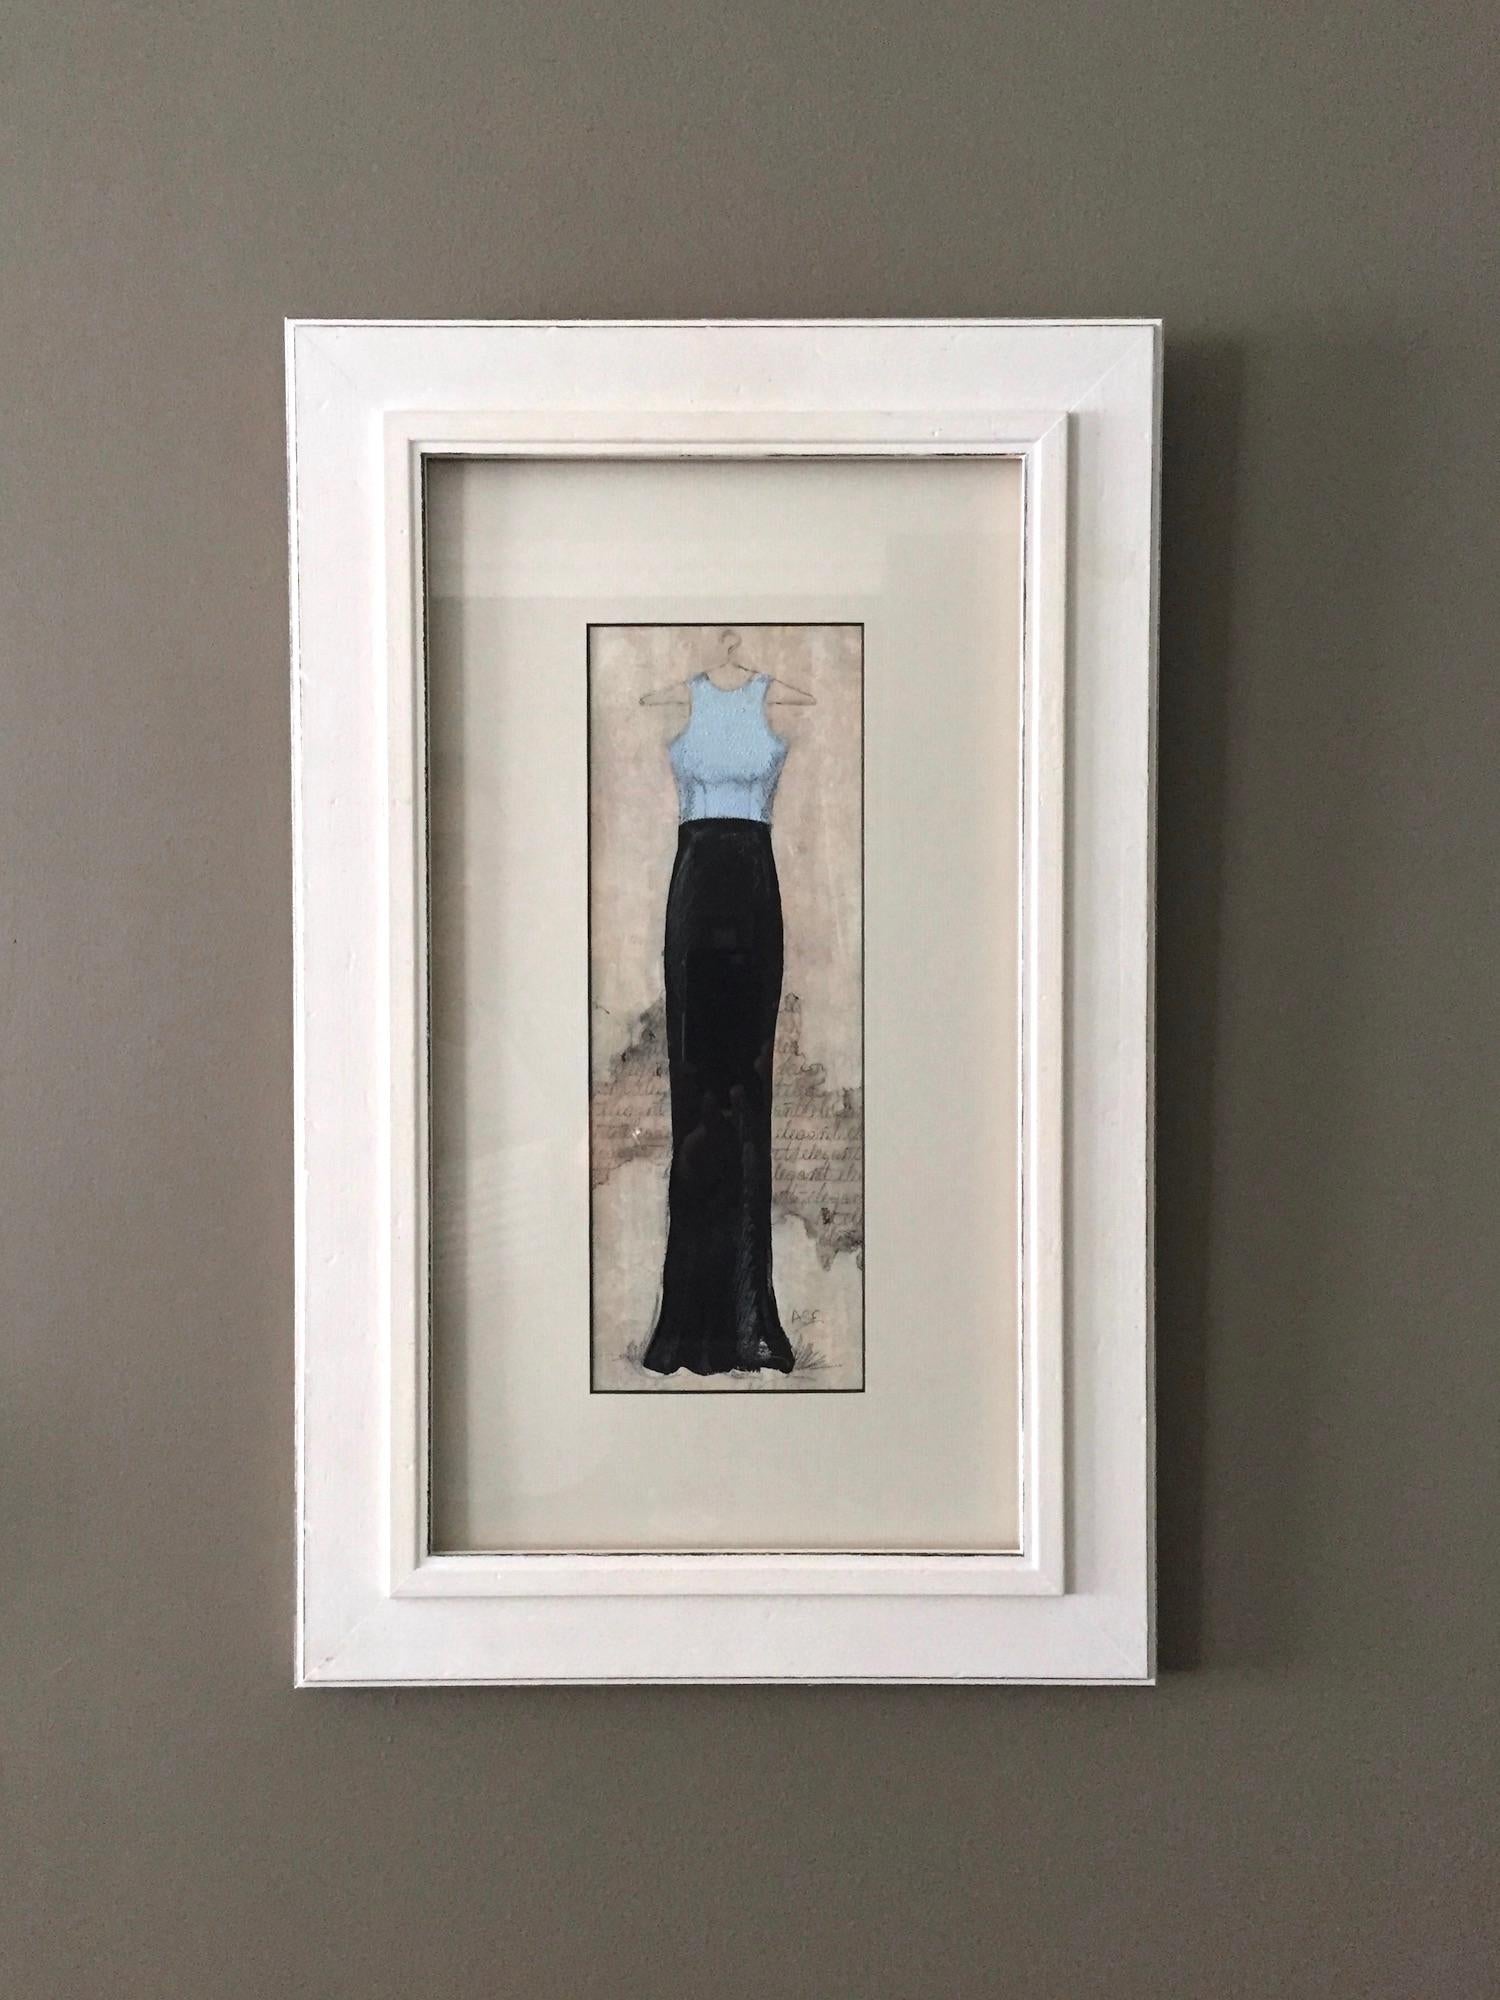 This dress painting on board blends mediums to create textured detail with an outcome both expressive and refined. A scripted pencil pattern adds to the layers of tone on tone neutrals built up in the background. The combination of delicate,